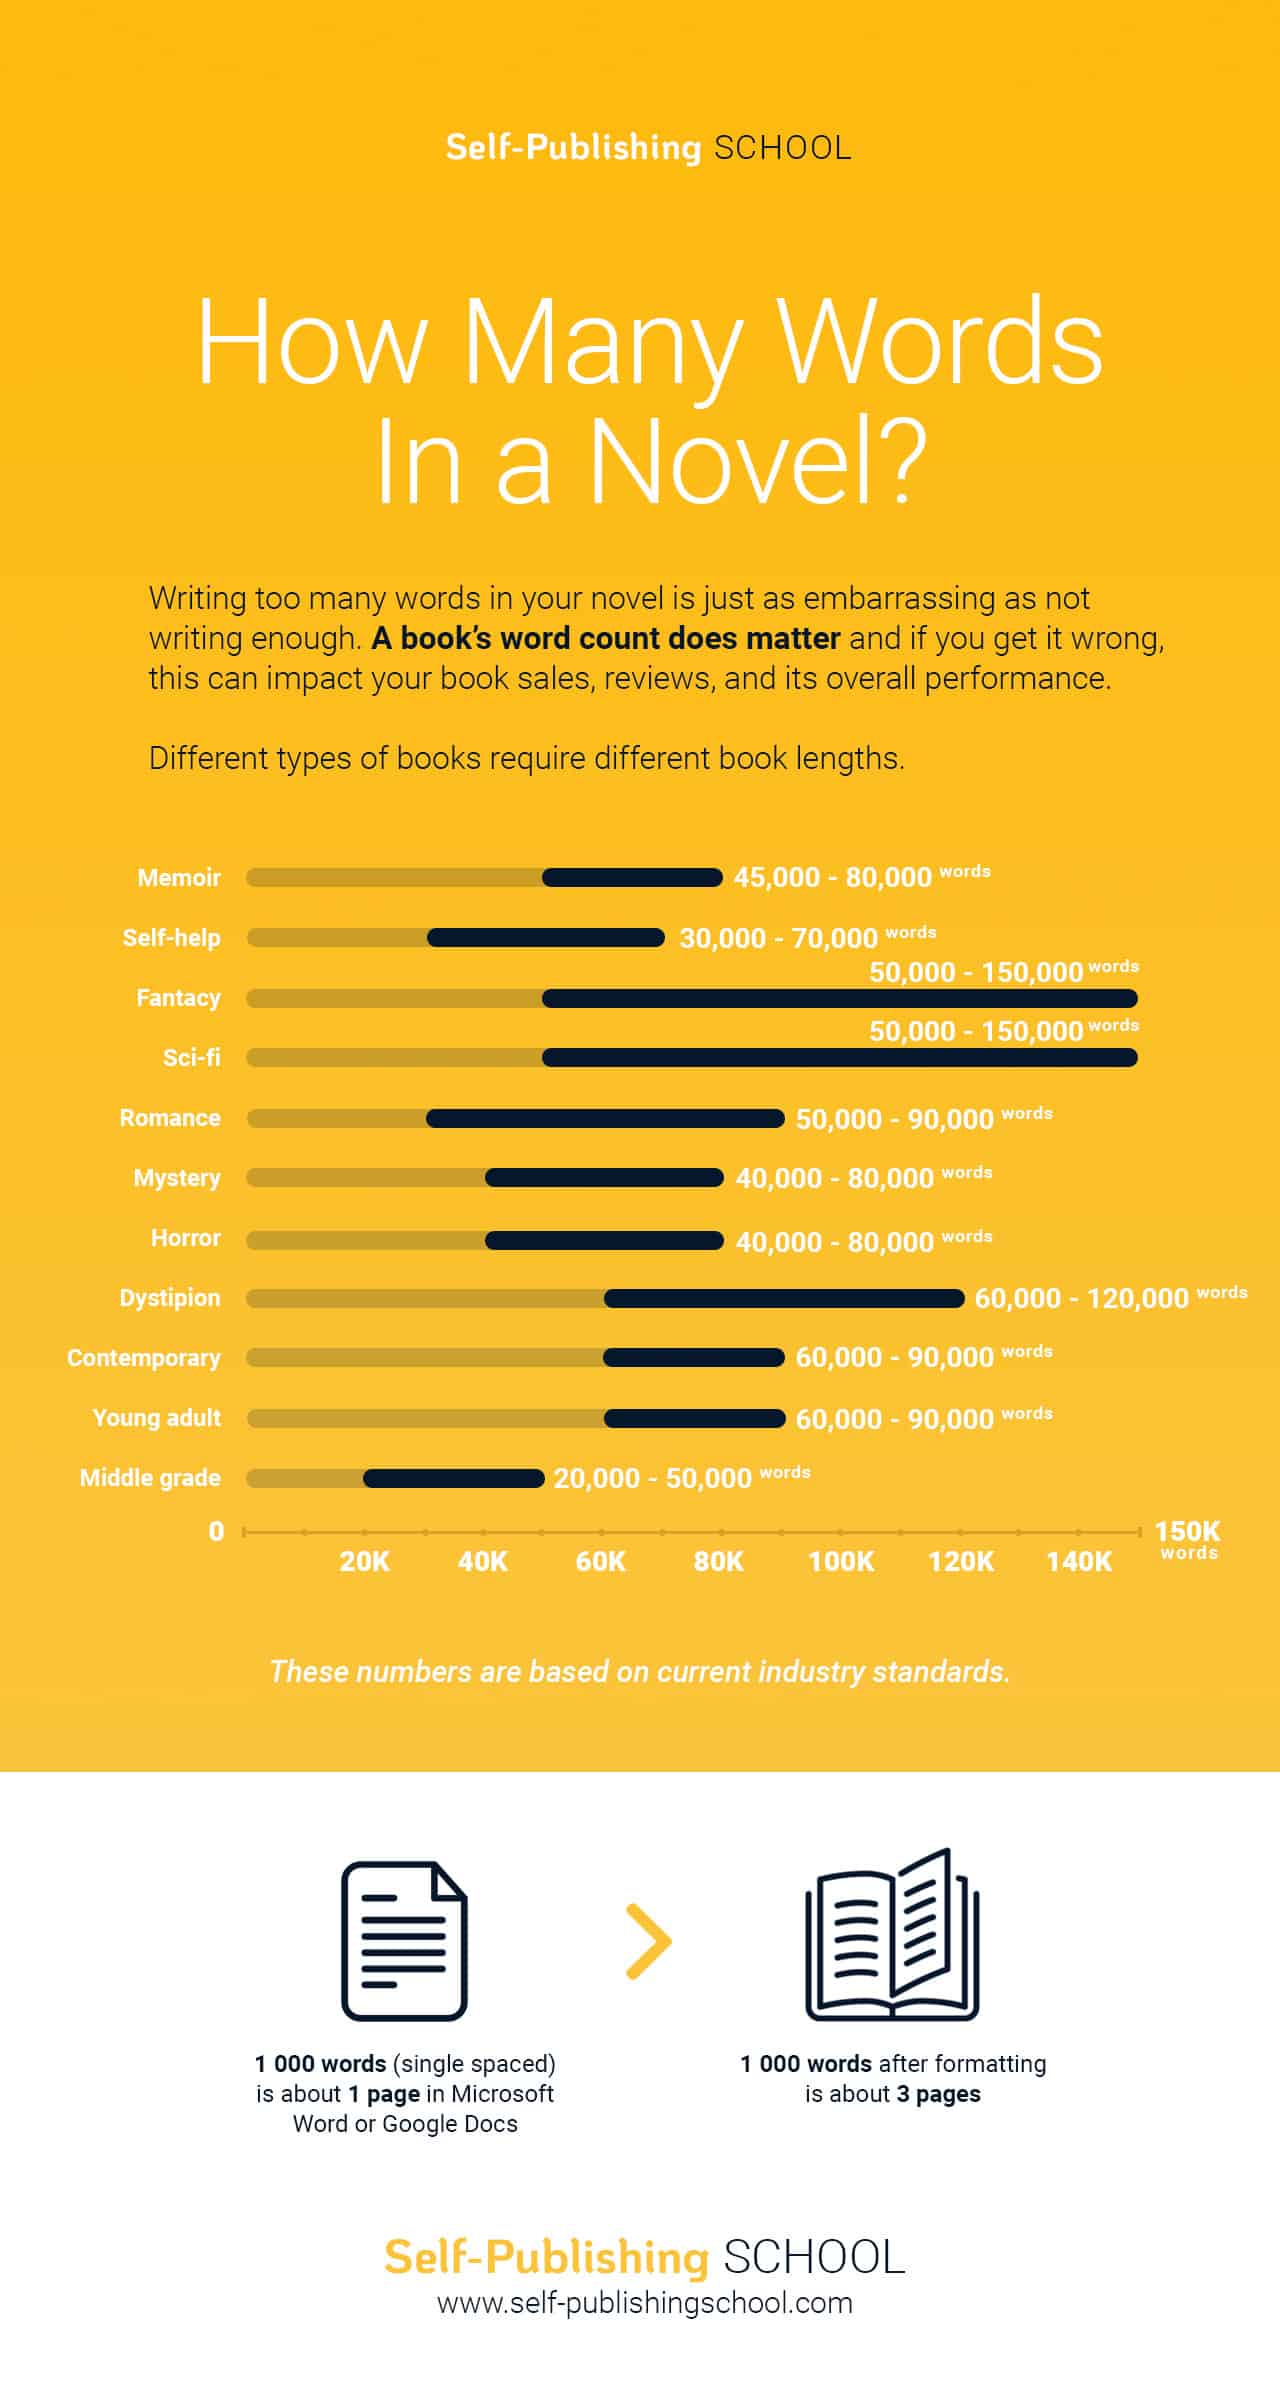 How Many Words In A Novel? Yellow Background With List Of Sub-Genres And Their Word Counts.